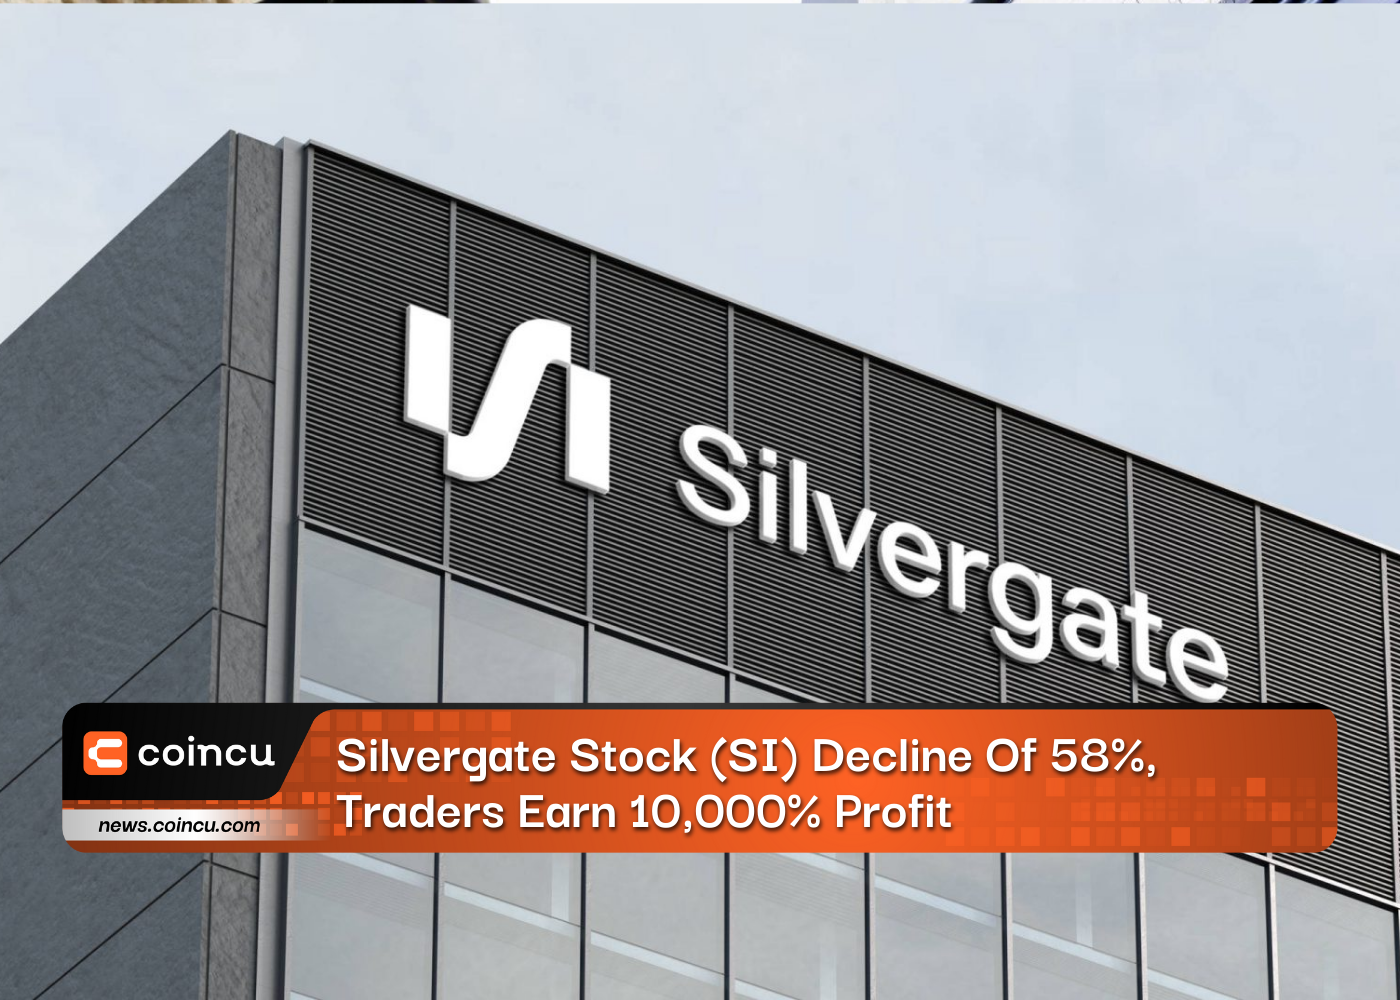 Silvergate Stock (SI) Decline Of 58%, Traders Earn 10,000% Profit